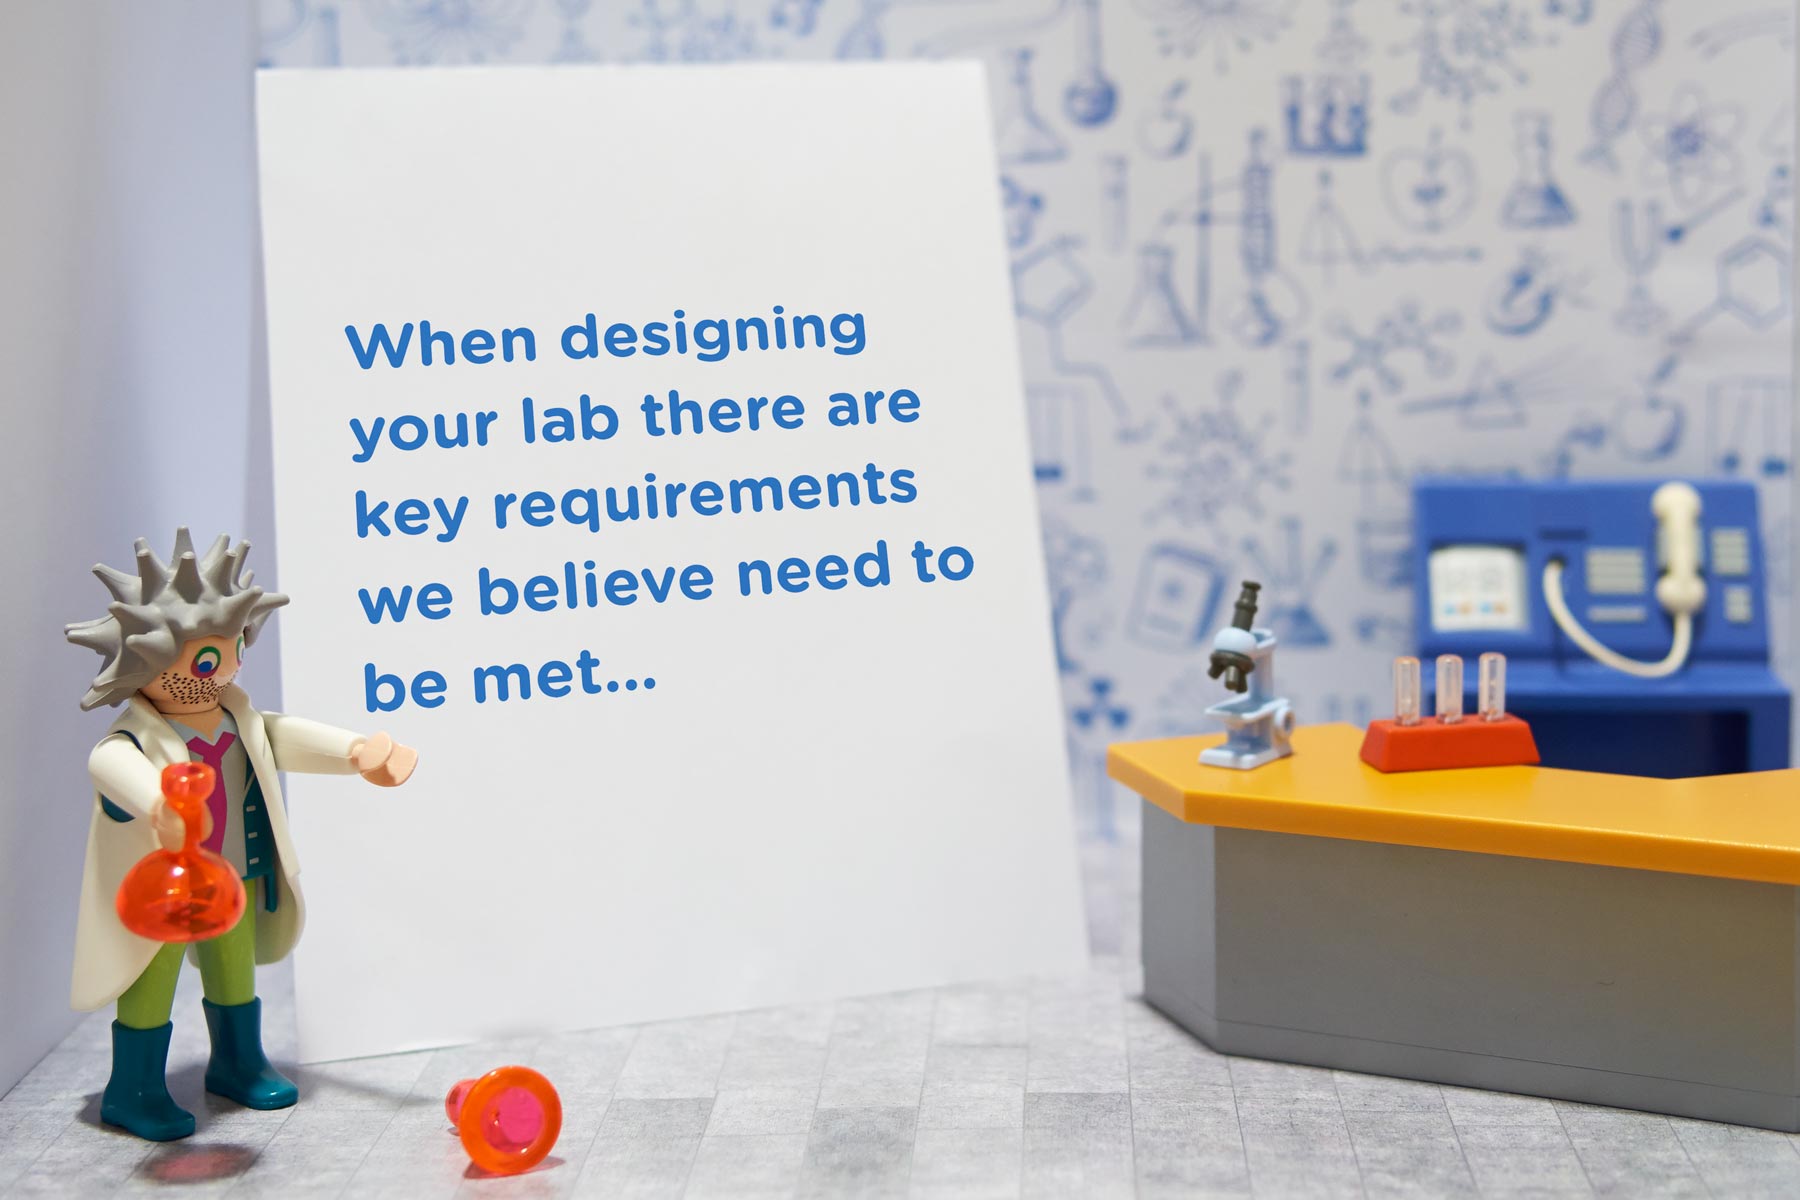 When designing your lab there are key requirements we believe need to be met.